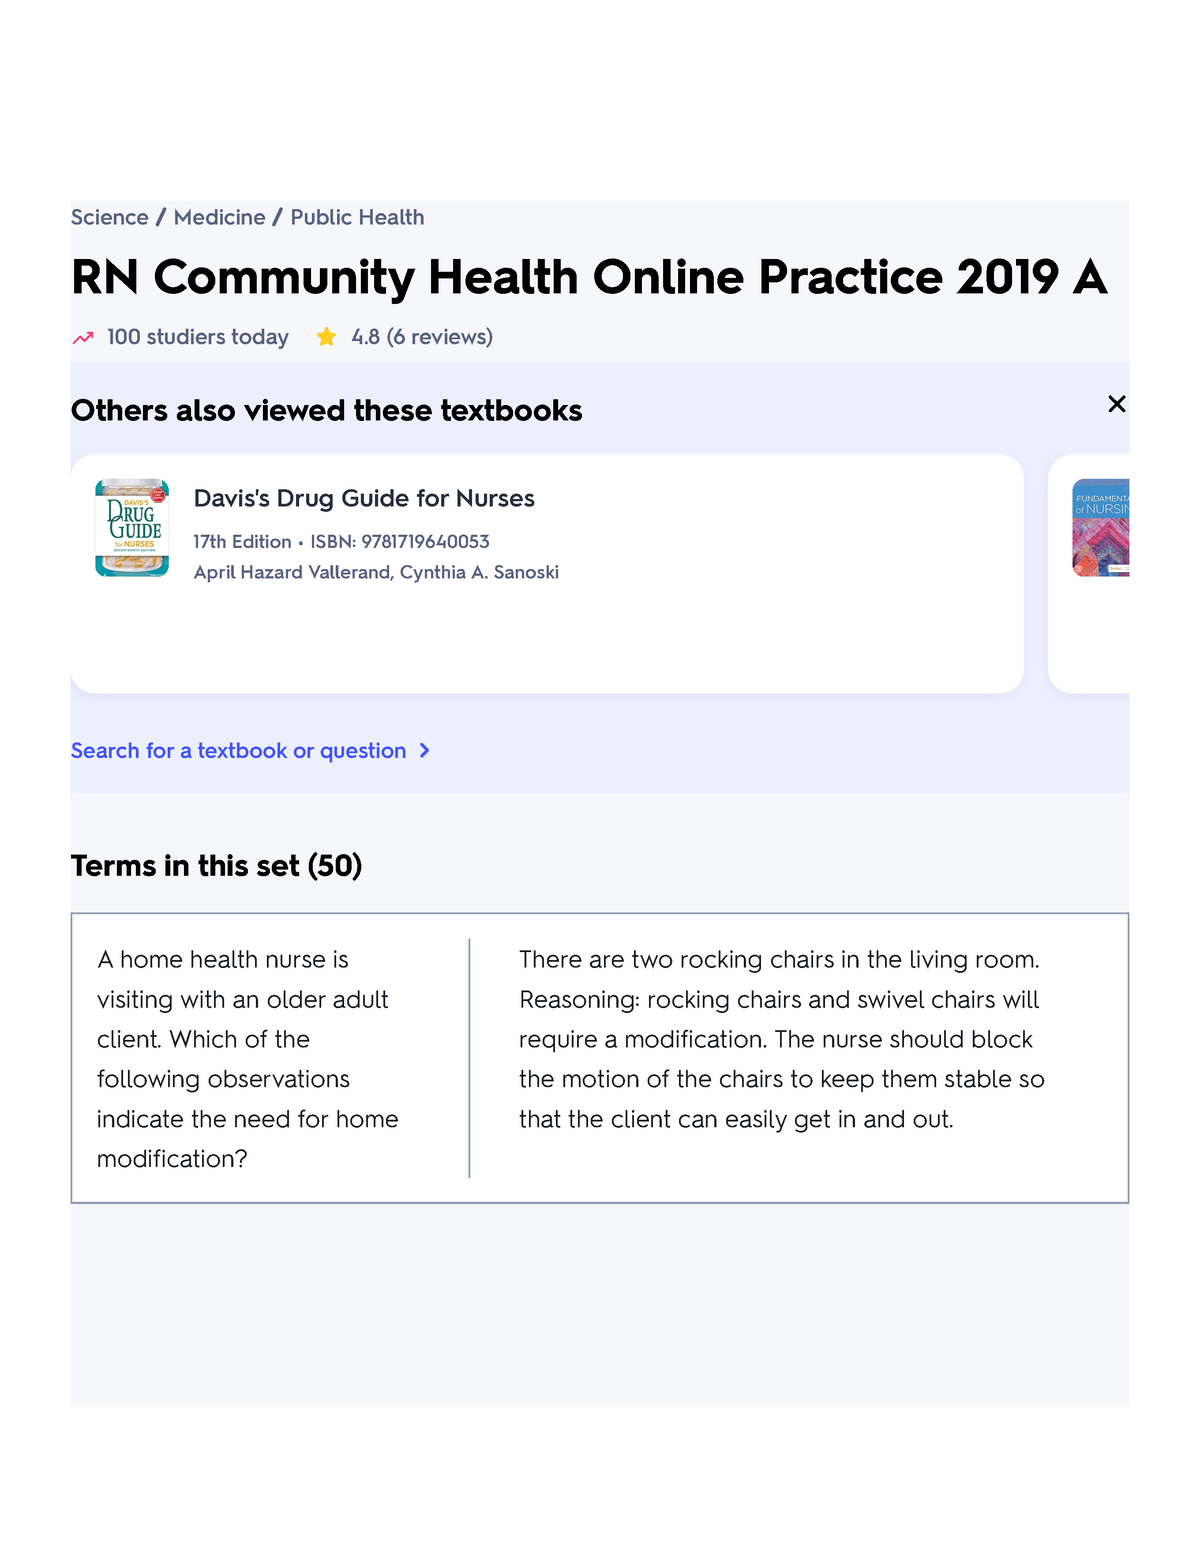 RN Community Health Online Practice 2019 A Flashcards Quizlet RN